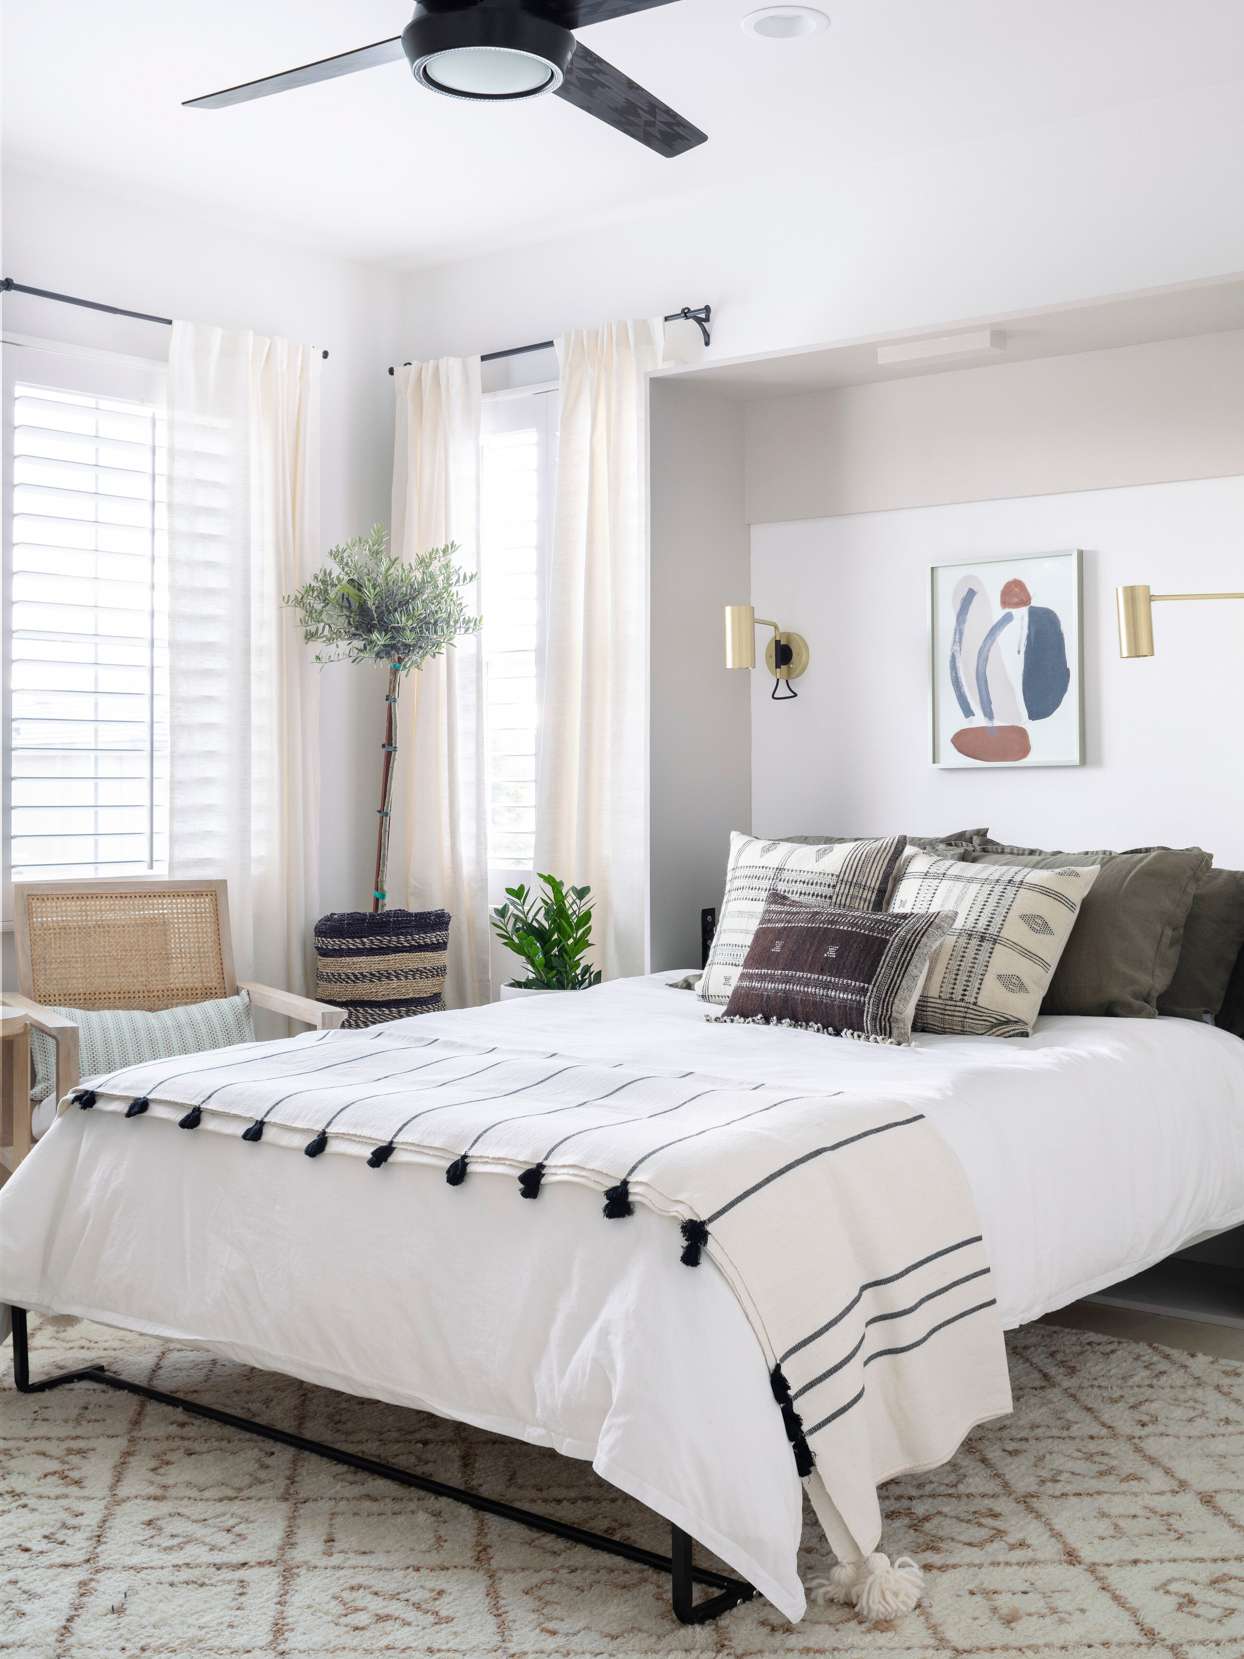 Decorating Tips for a Well Outfitted Guest Bedroom   Better Homes ...